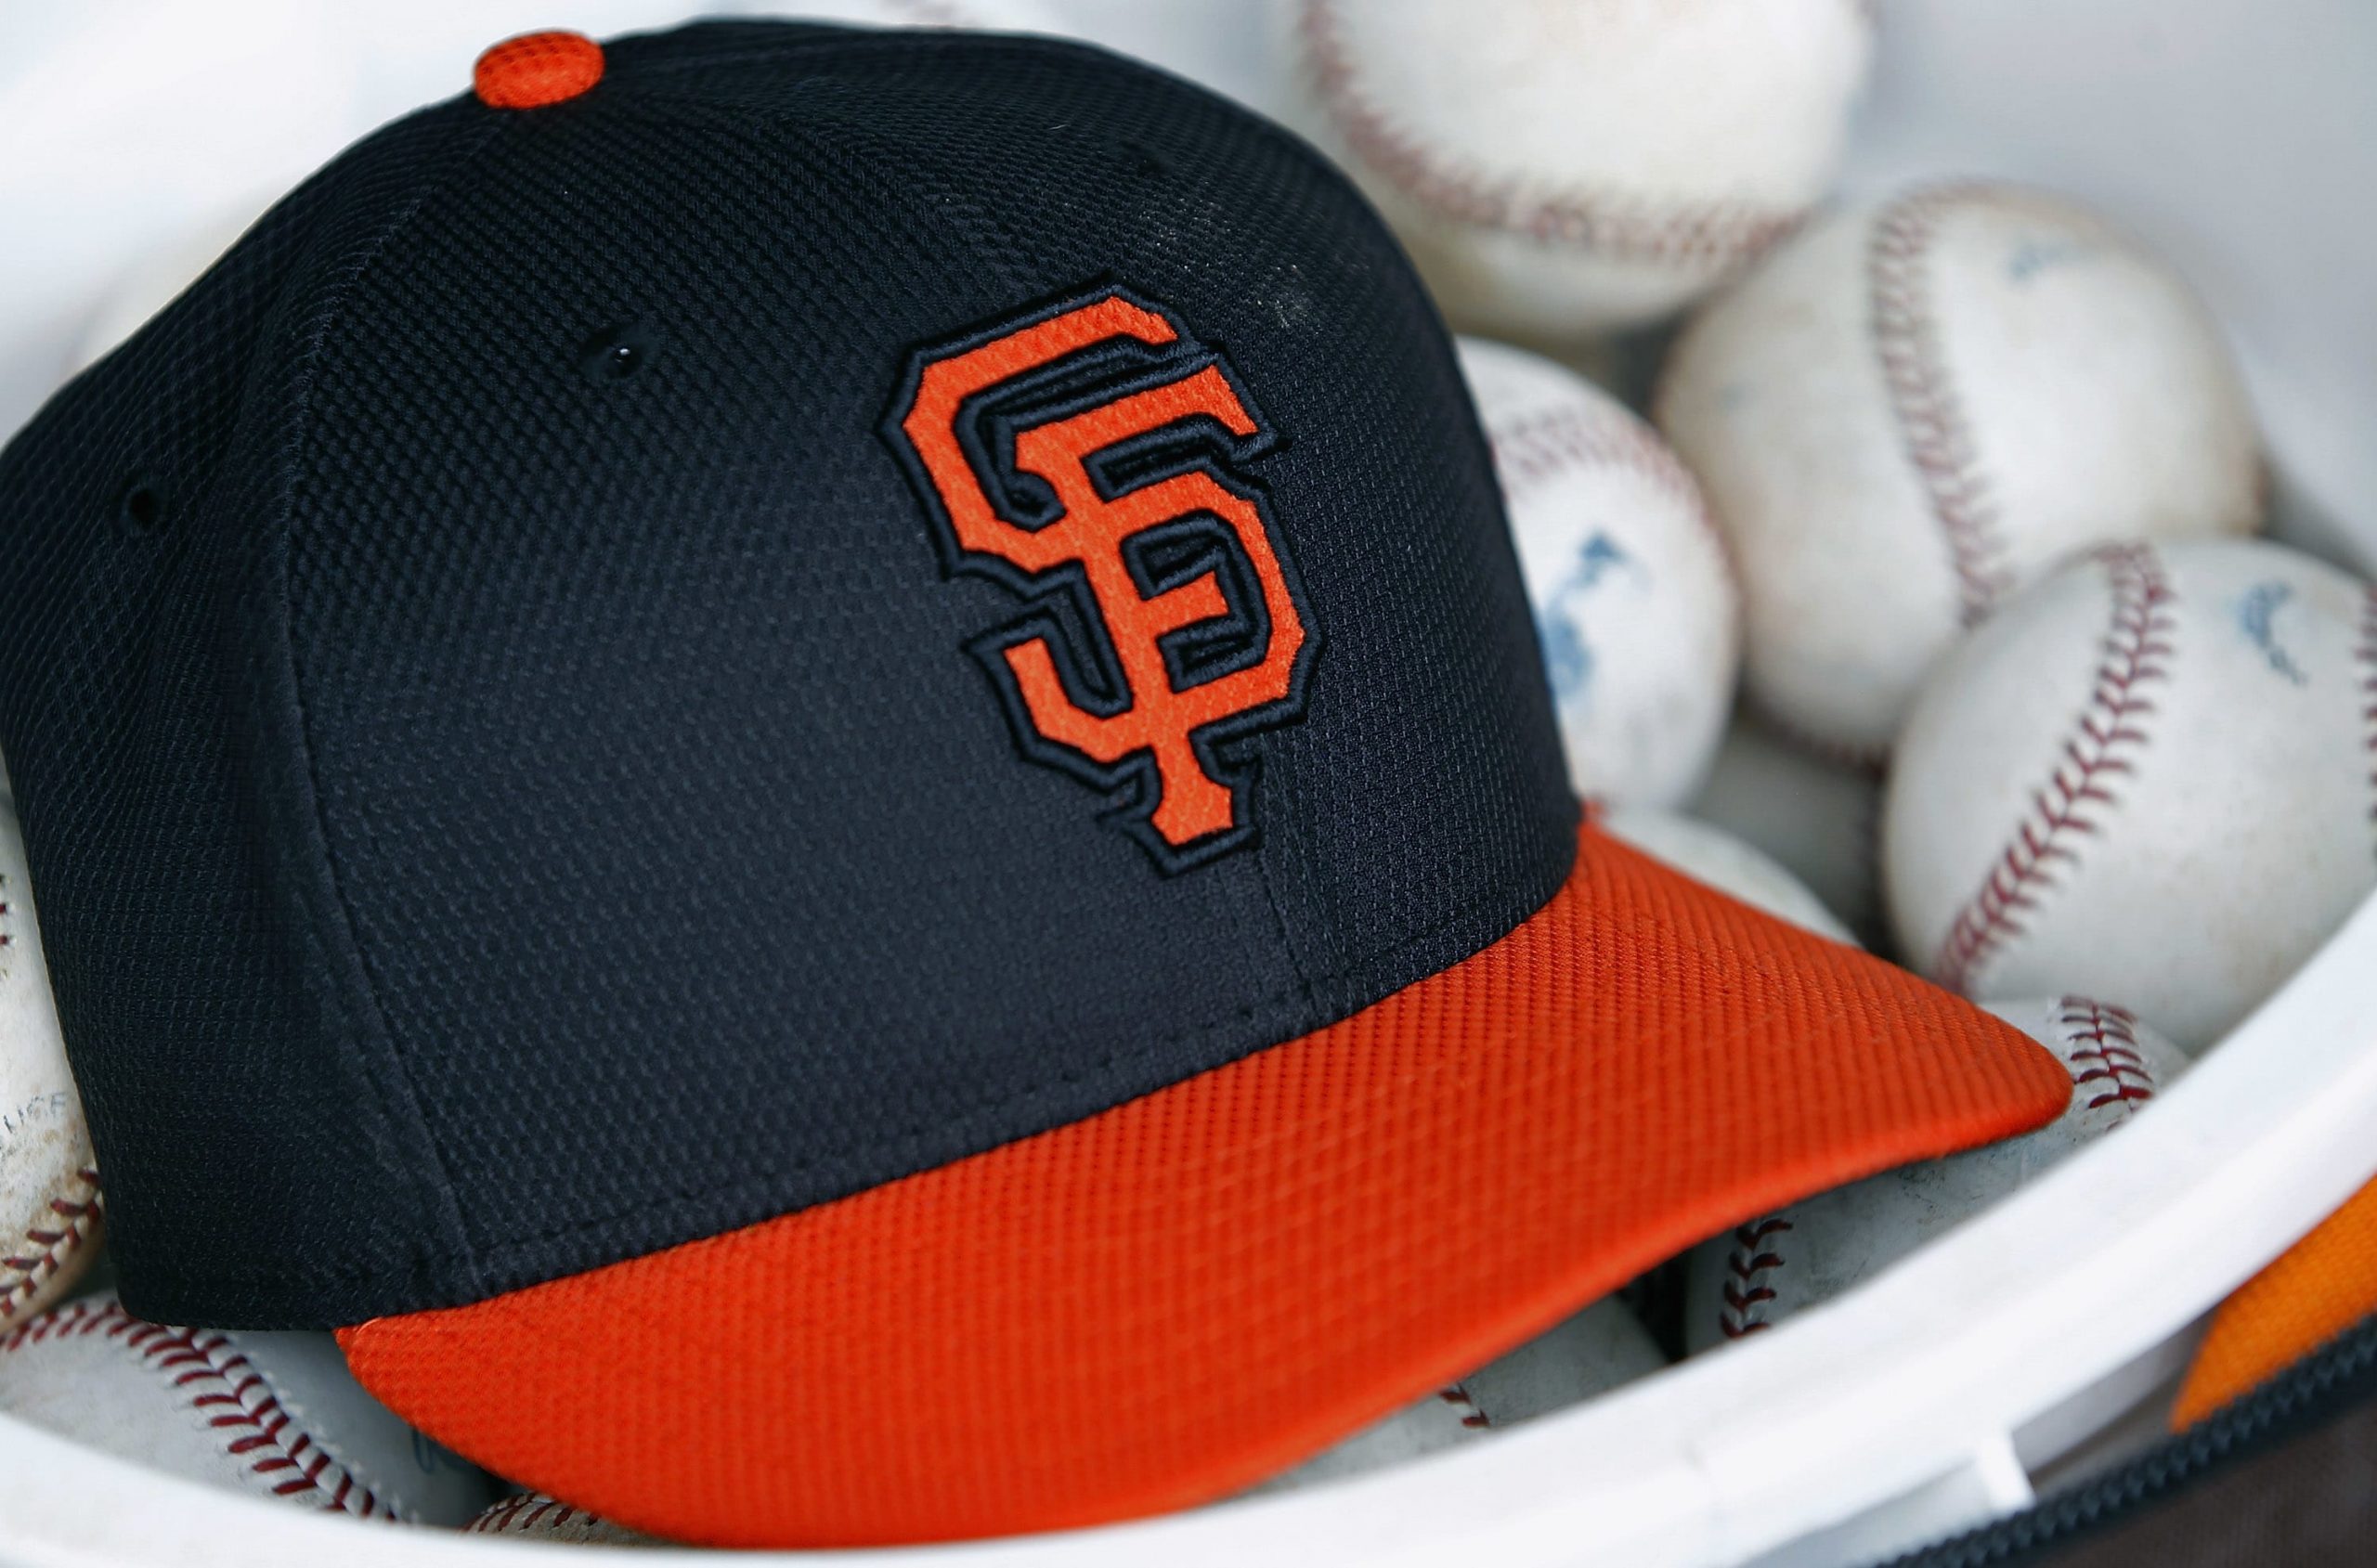 The old men of San Francisco and their Giants